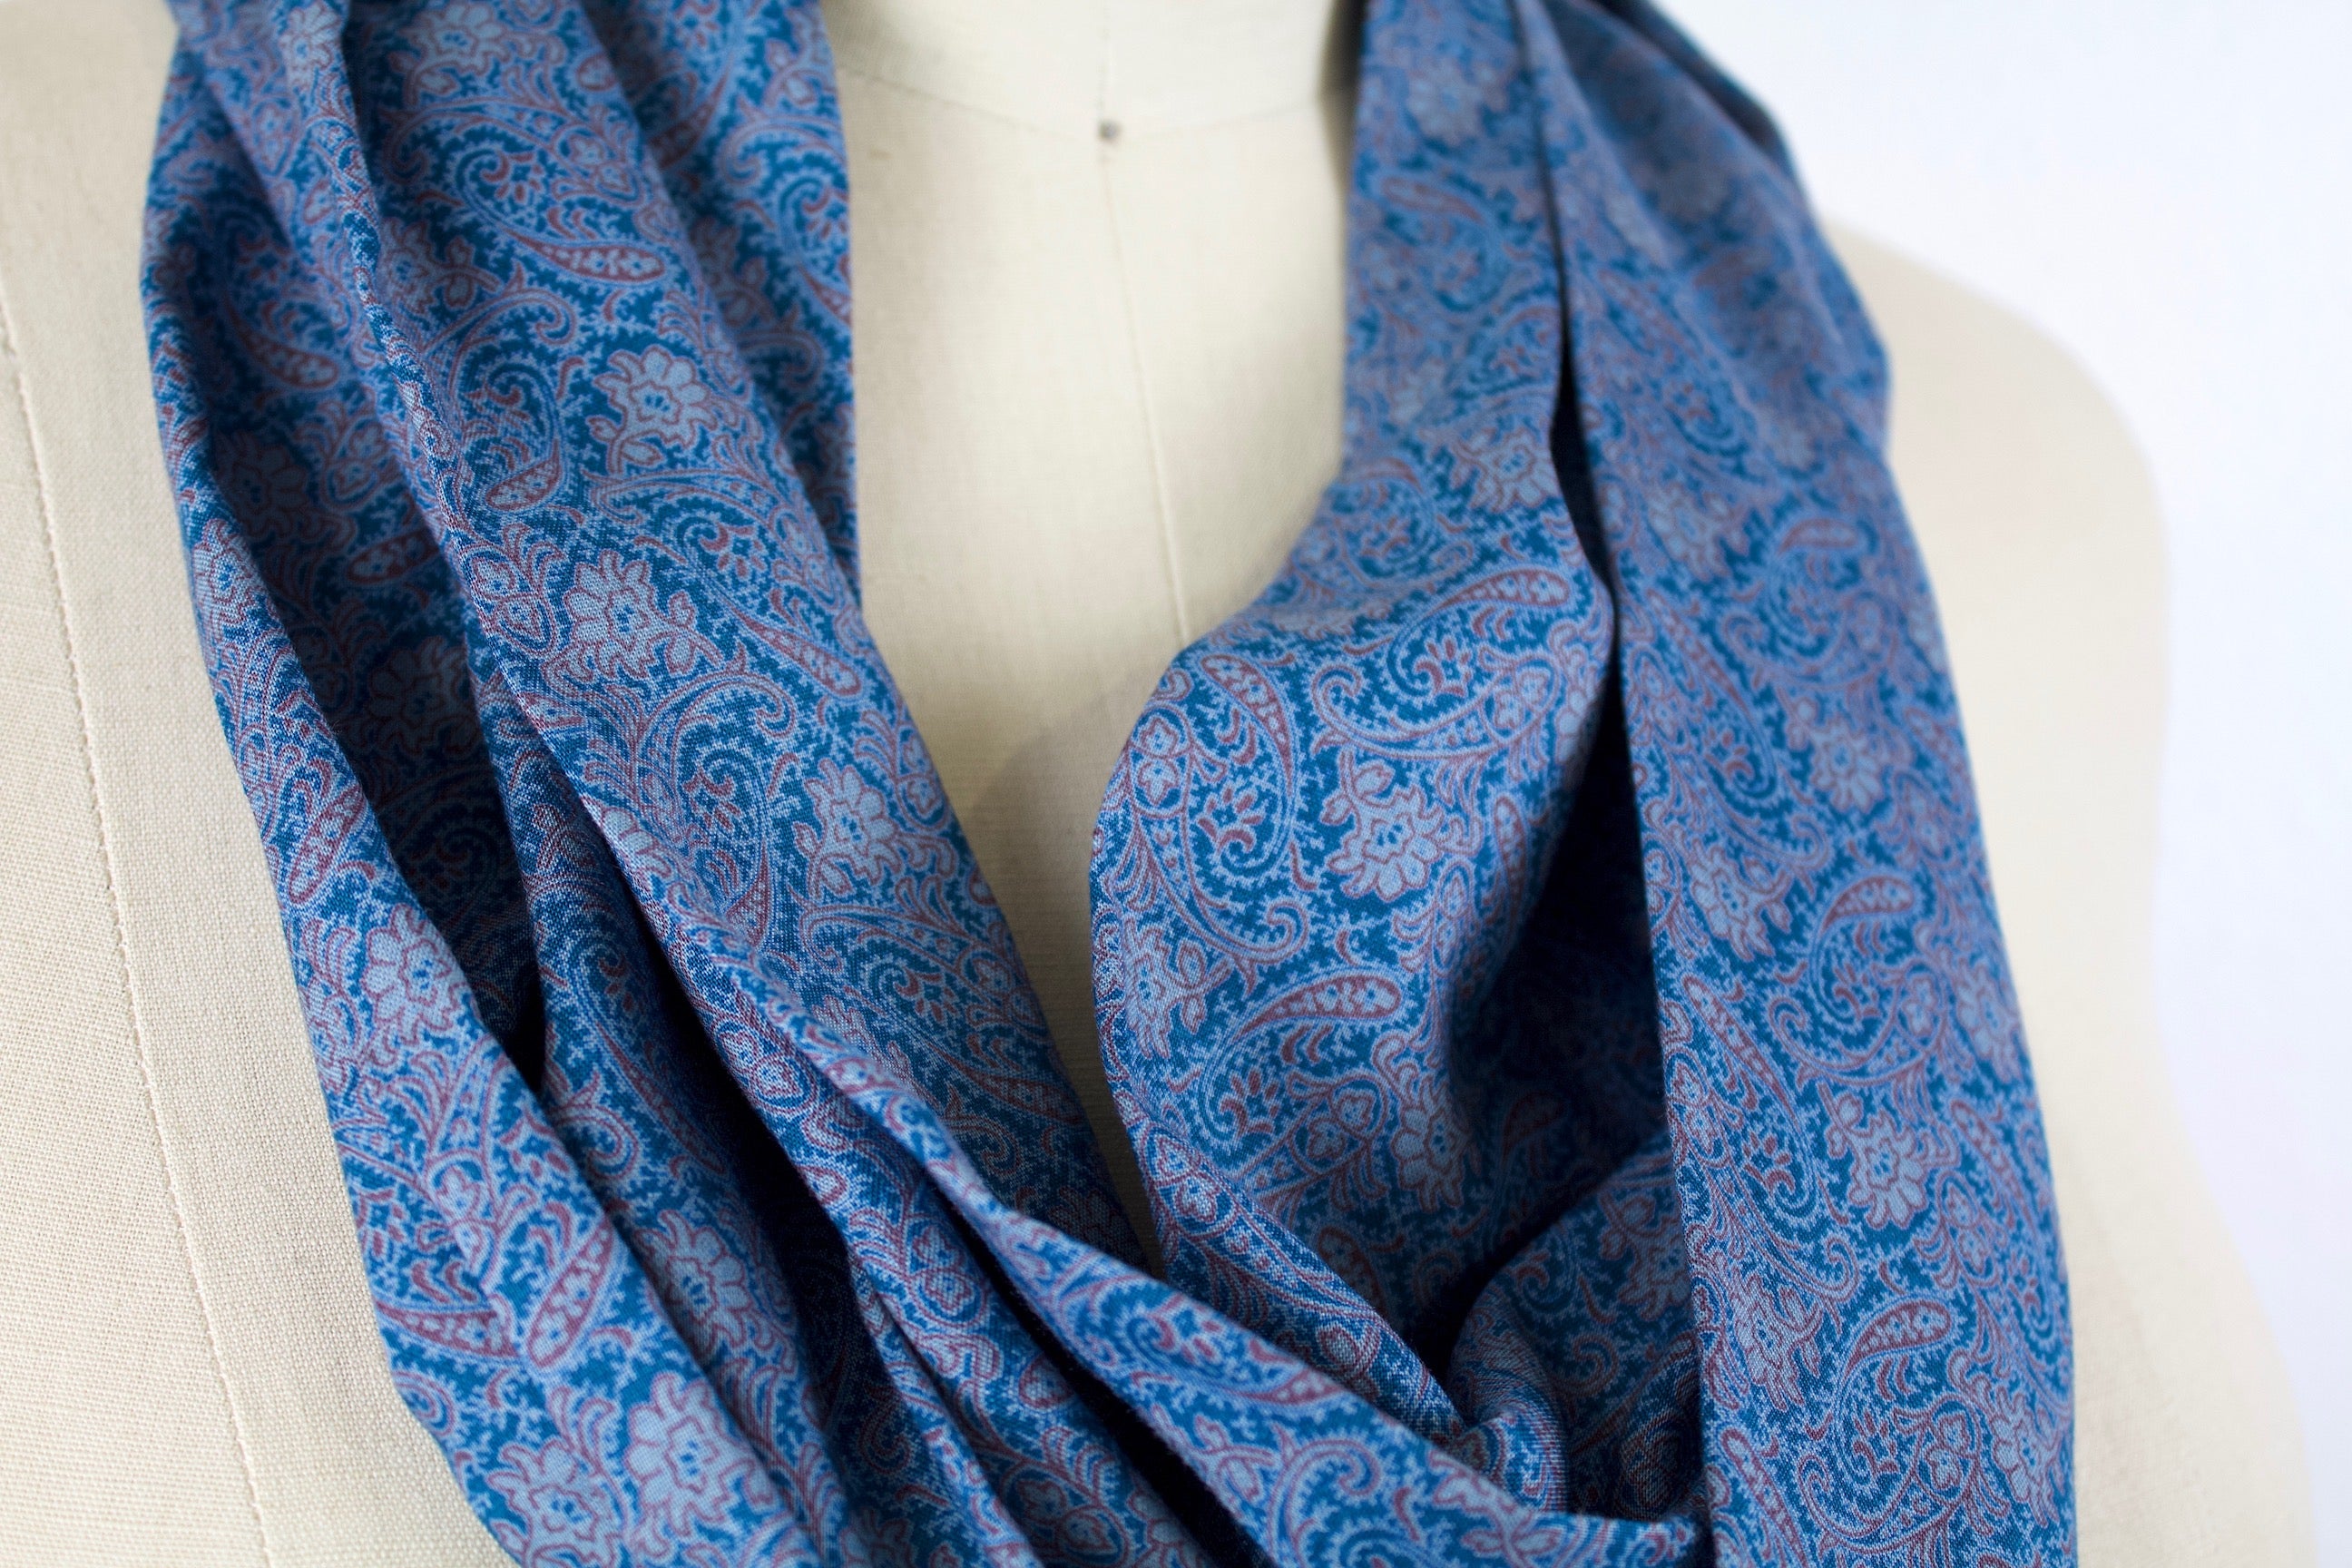 Blue Paisley Infinity Scarf-The Blue Peony-Category_Infinity Scarf,Color_Blue,Department_Personal Accessory,Material_Rayon,Pattern_Paisley